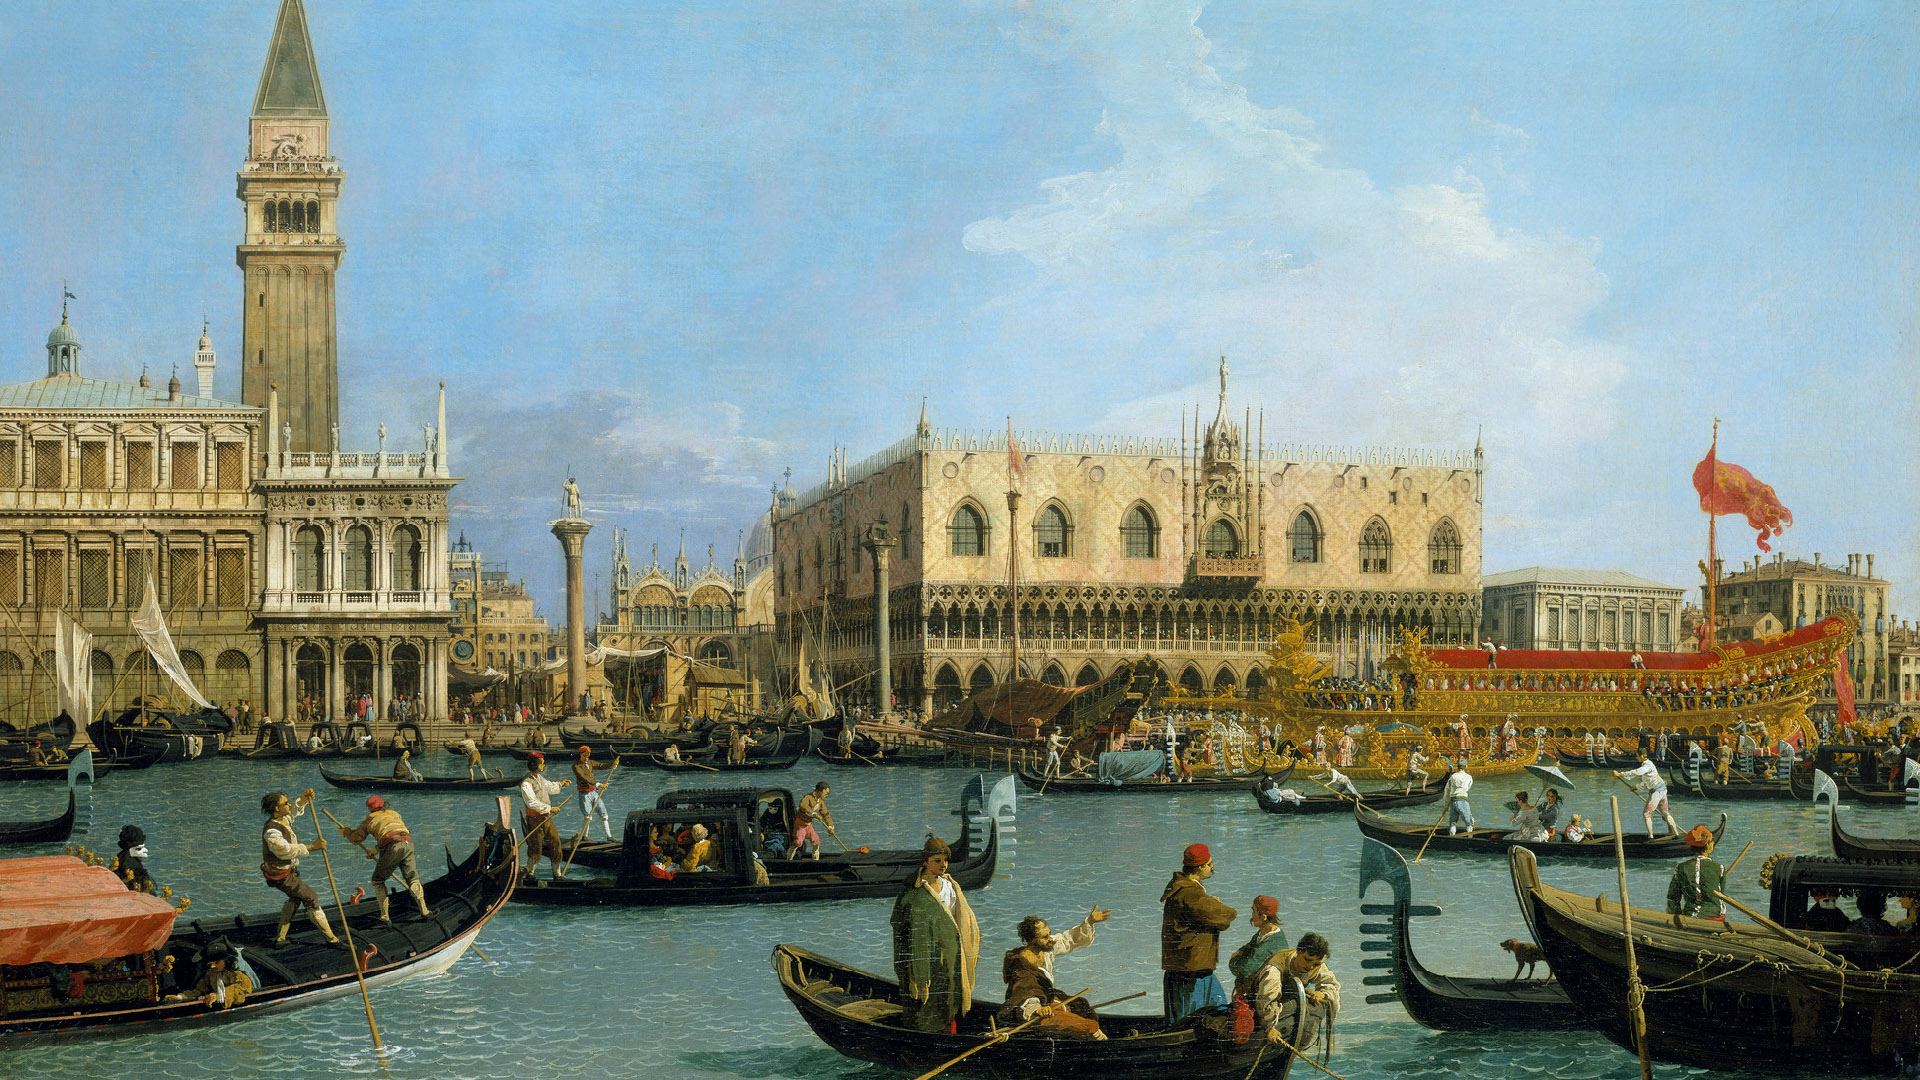 The Glory of Venice - 500 years of Music and the Arts